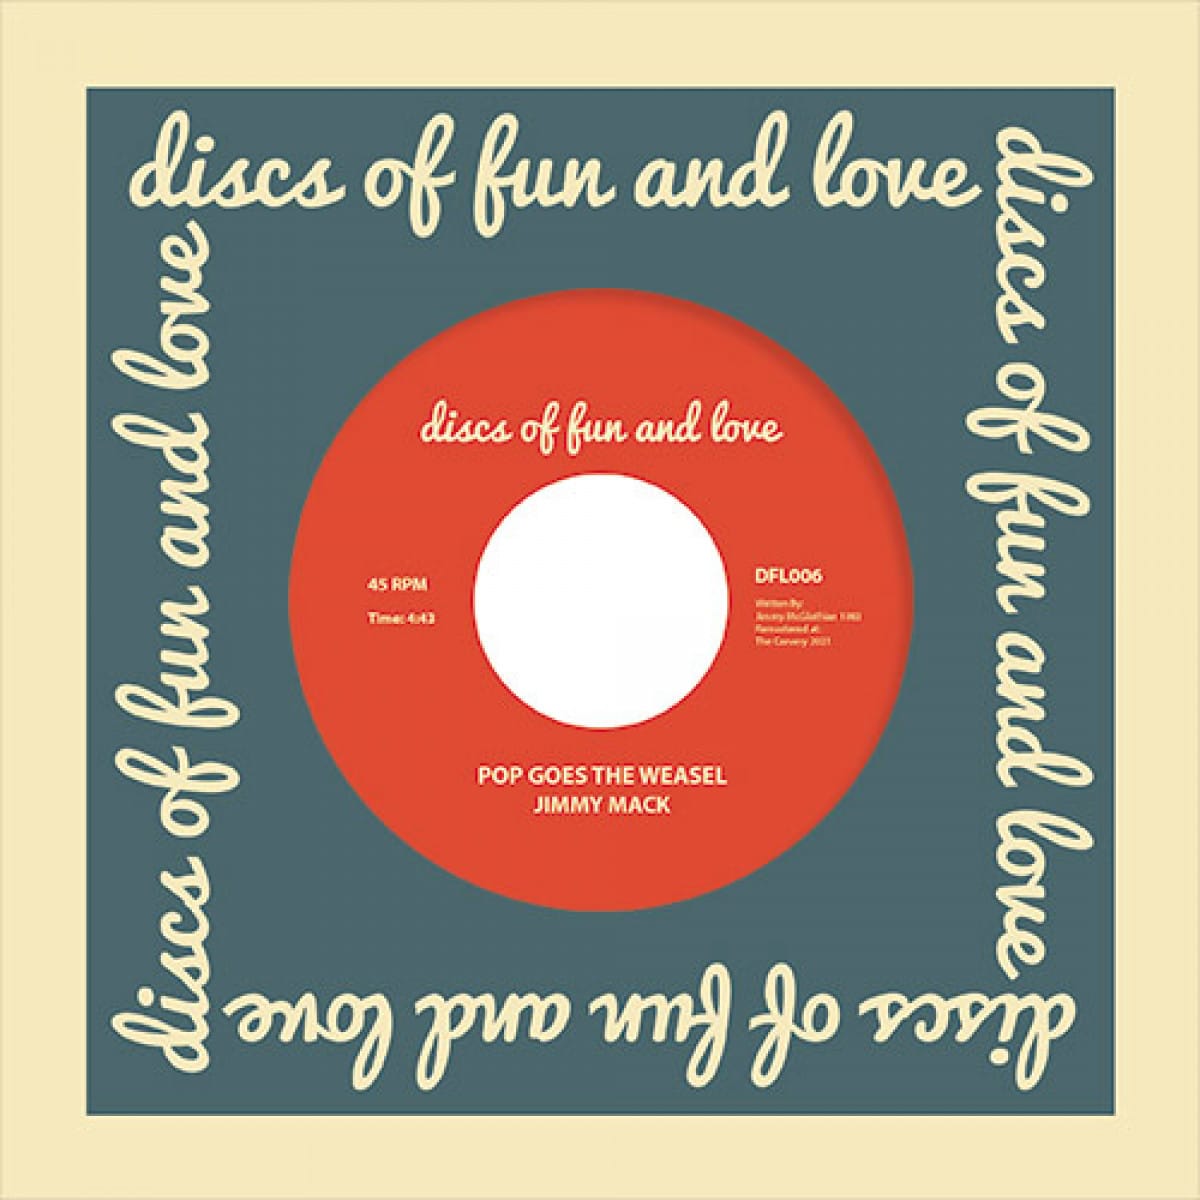 Jimmy Mack - Pop Goes The Weasel - DFL006 - DISCS OF FUN AND LOVE